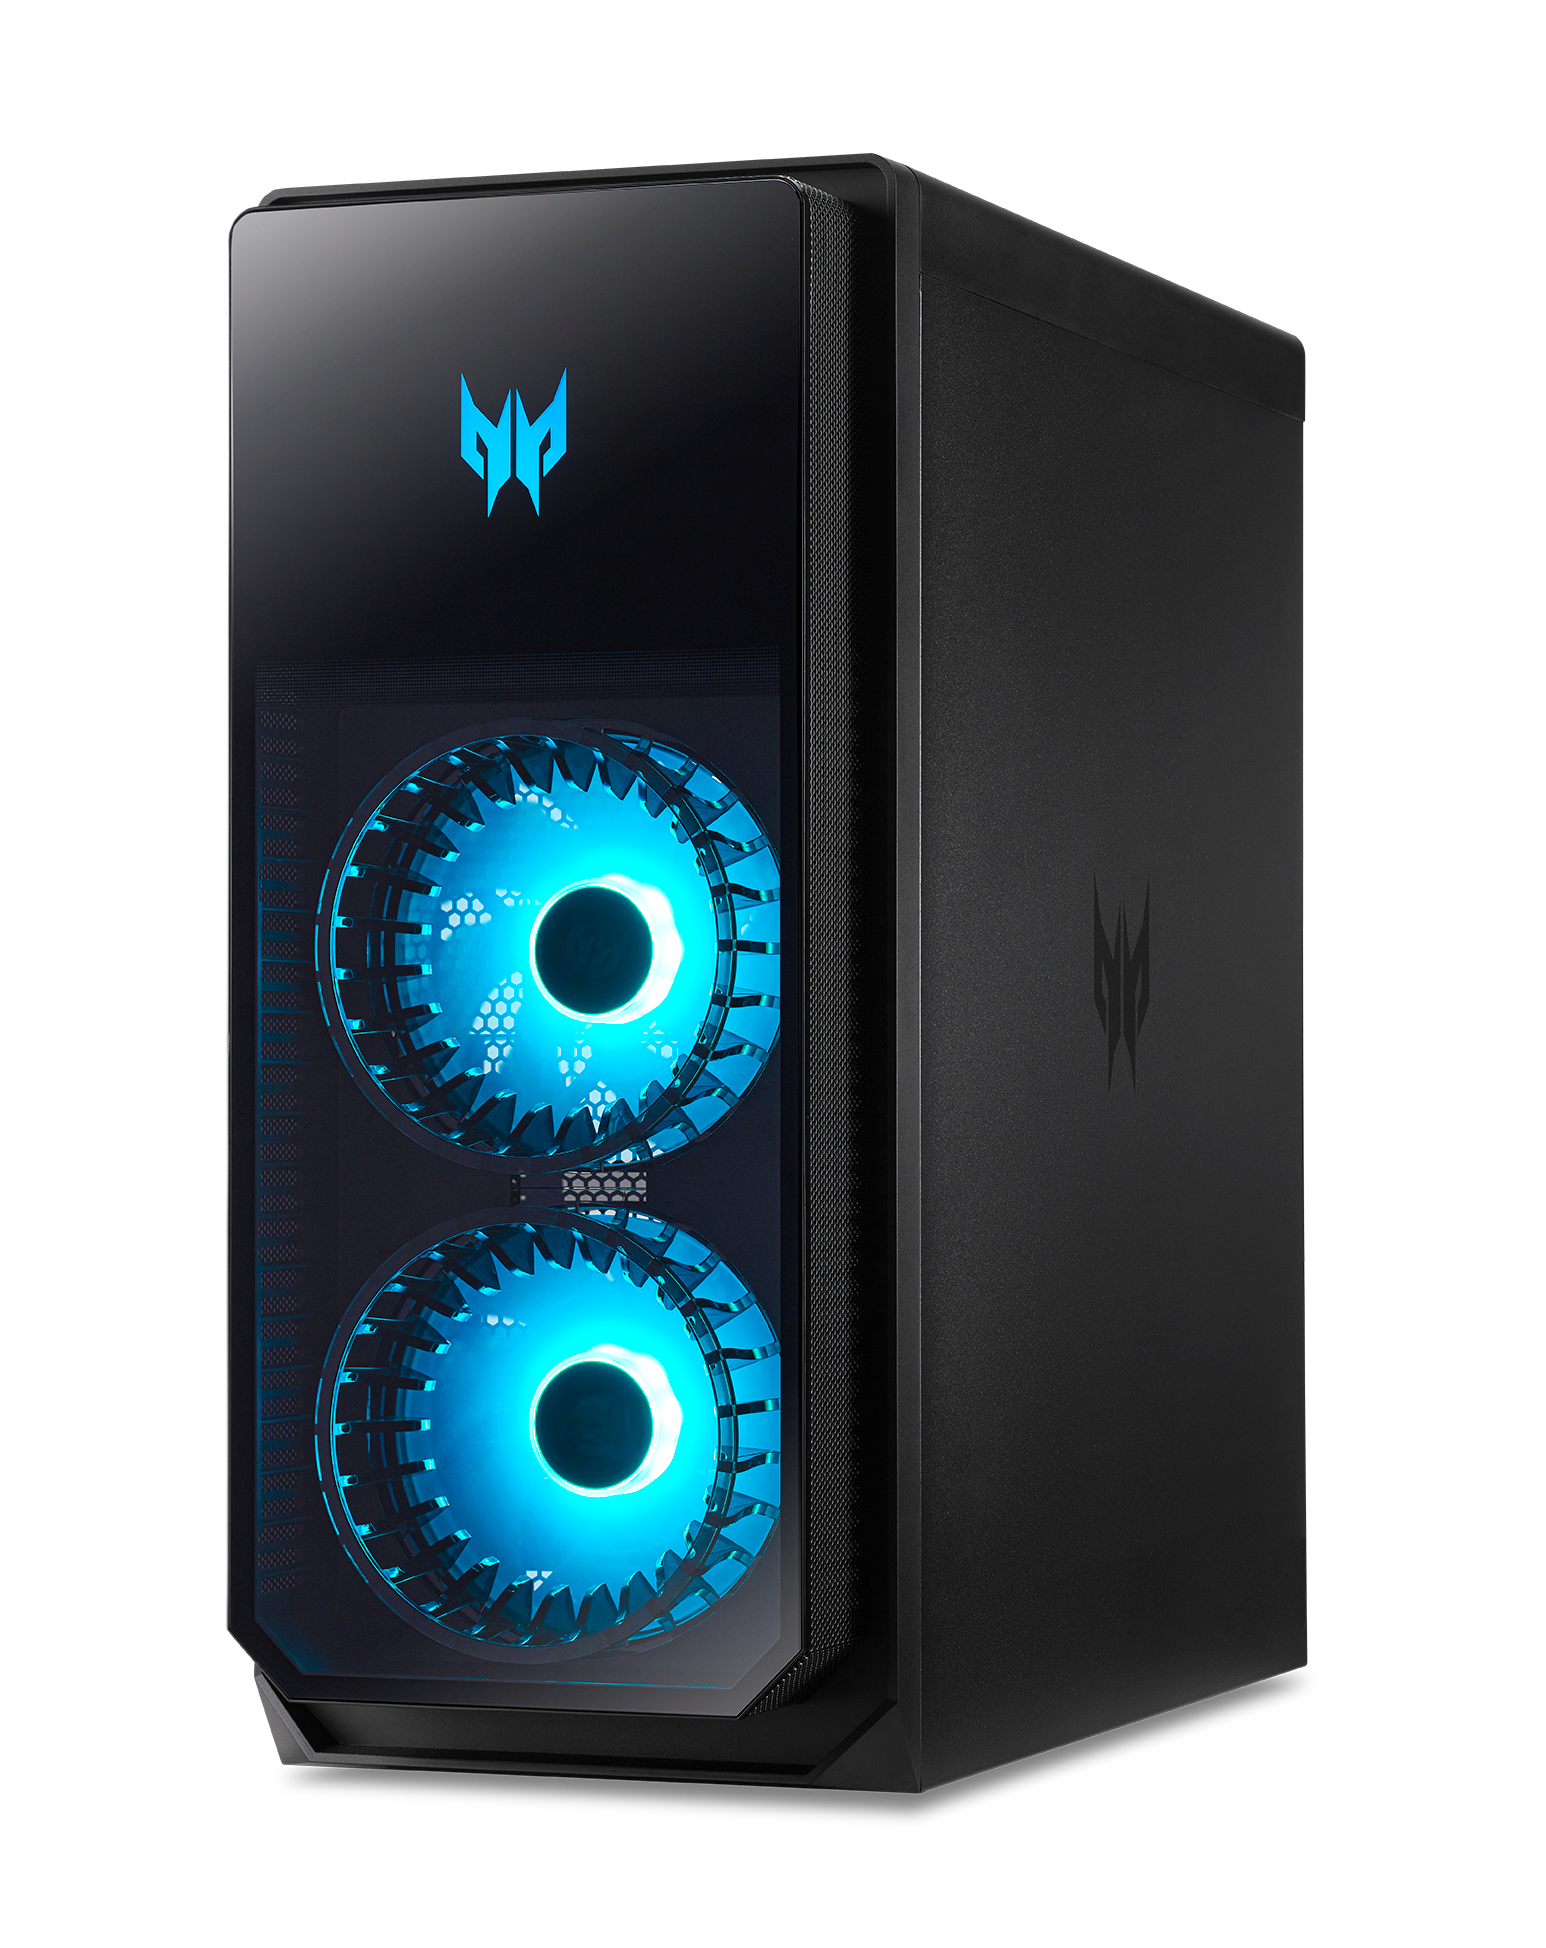 Rent Acer Predator Orion Gaming Desktop - Intel® Core™ i7-12700F - 16GB -  1TB SSD - NVIDIA® GeForce® RTX 3070 from €99.90 per month